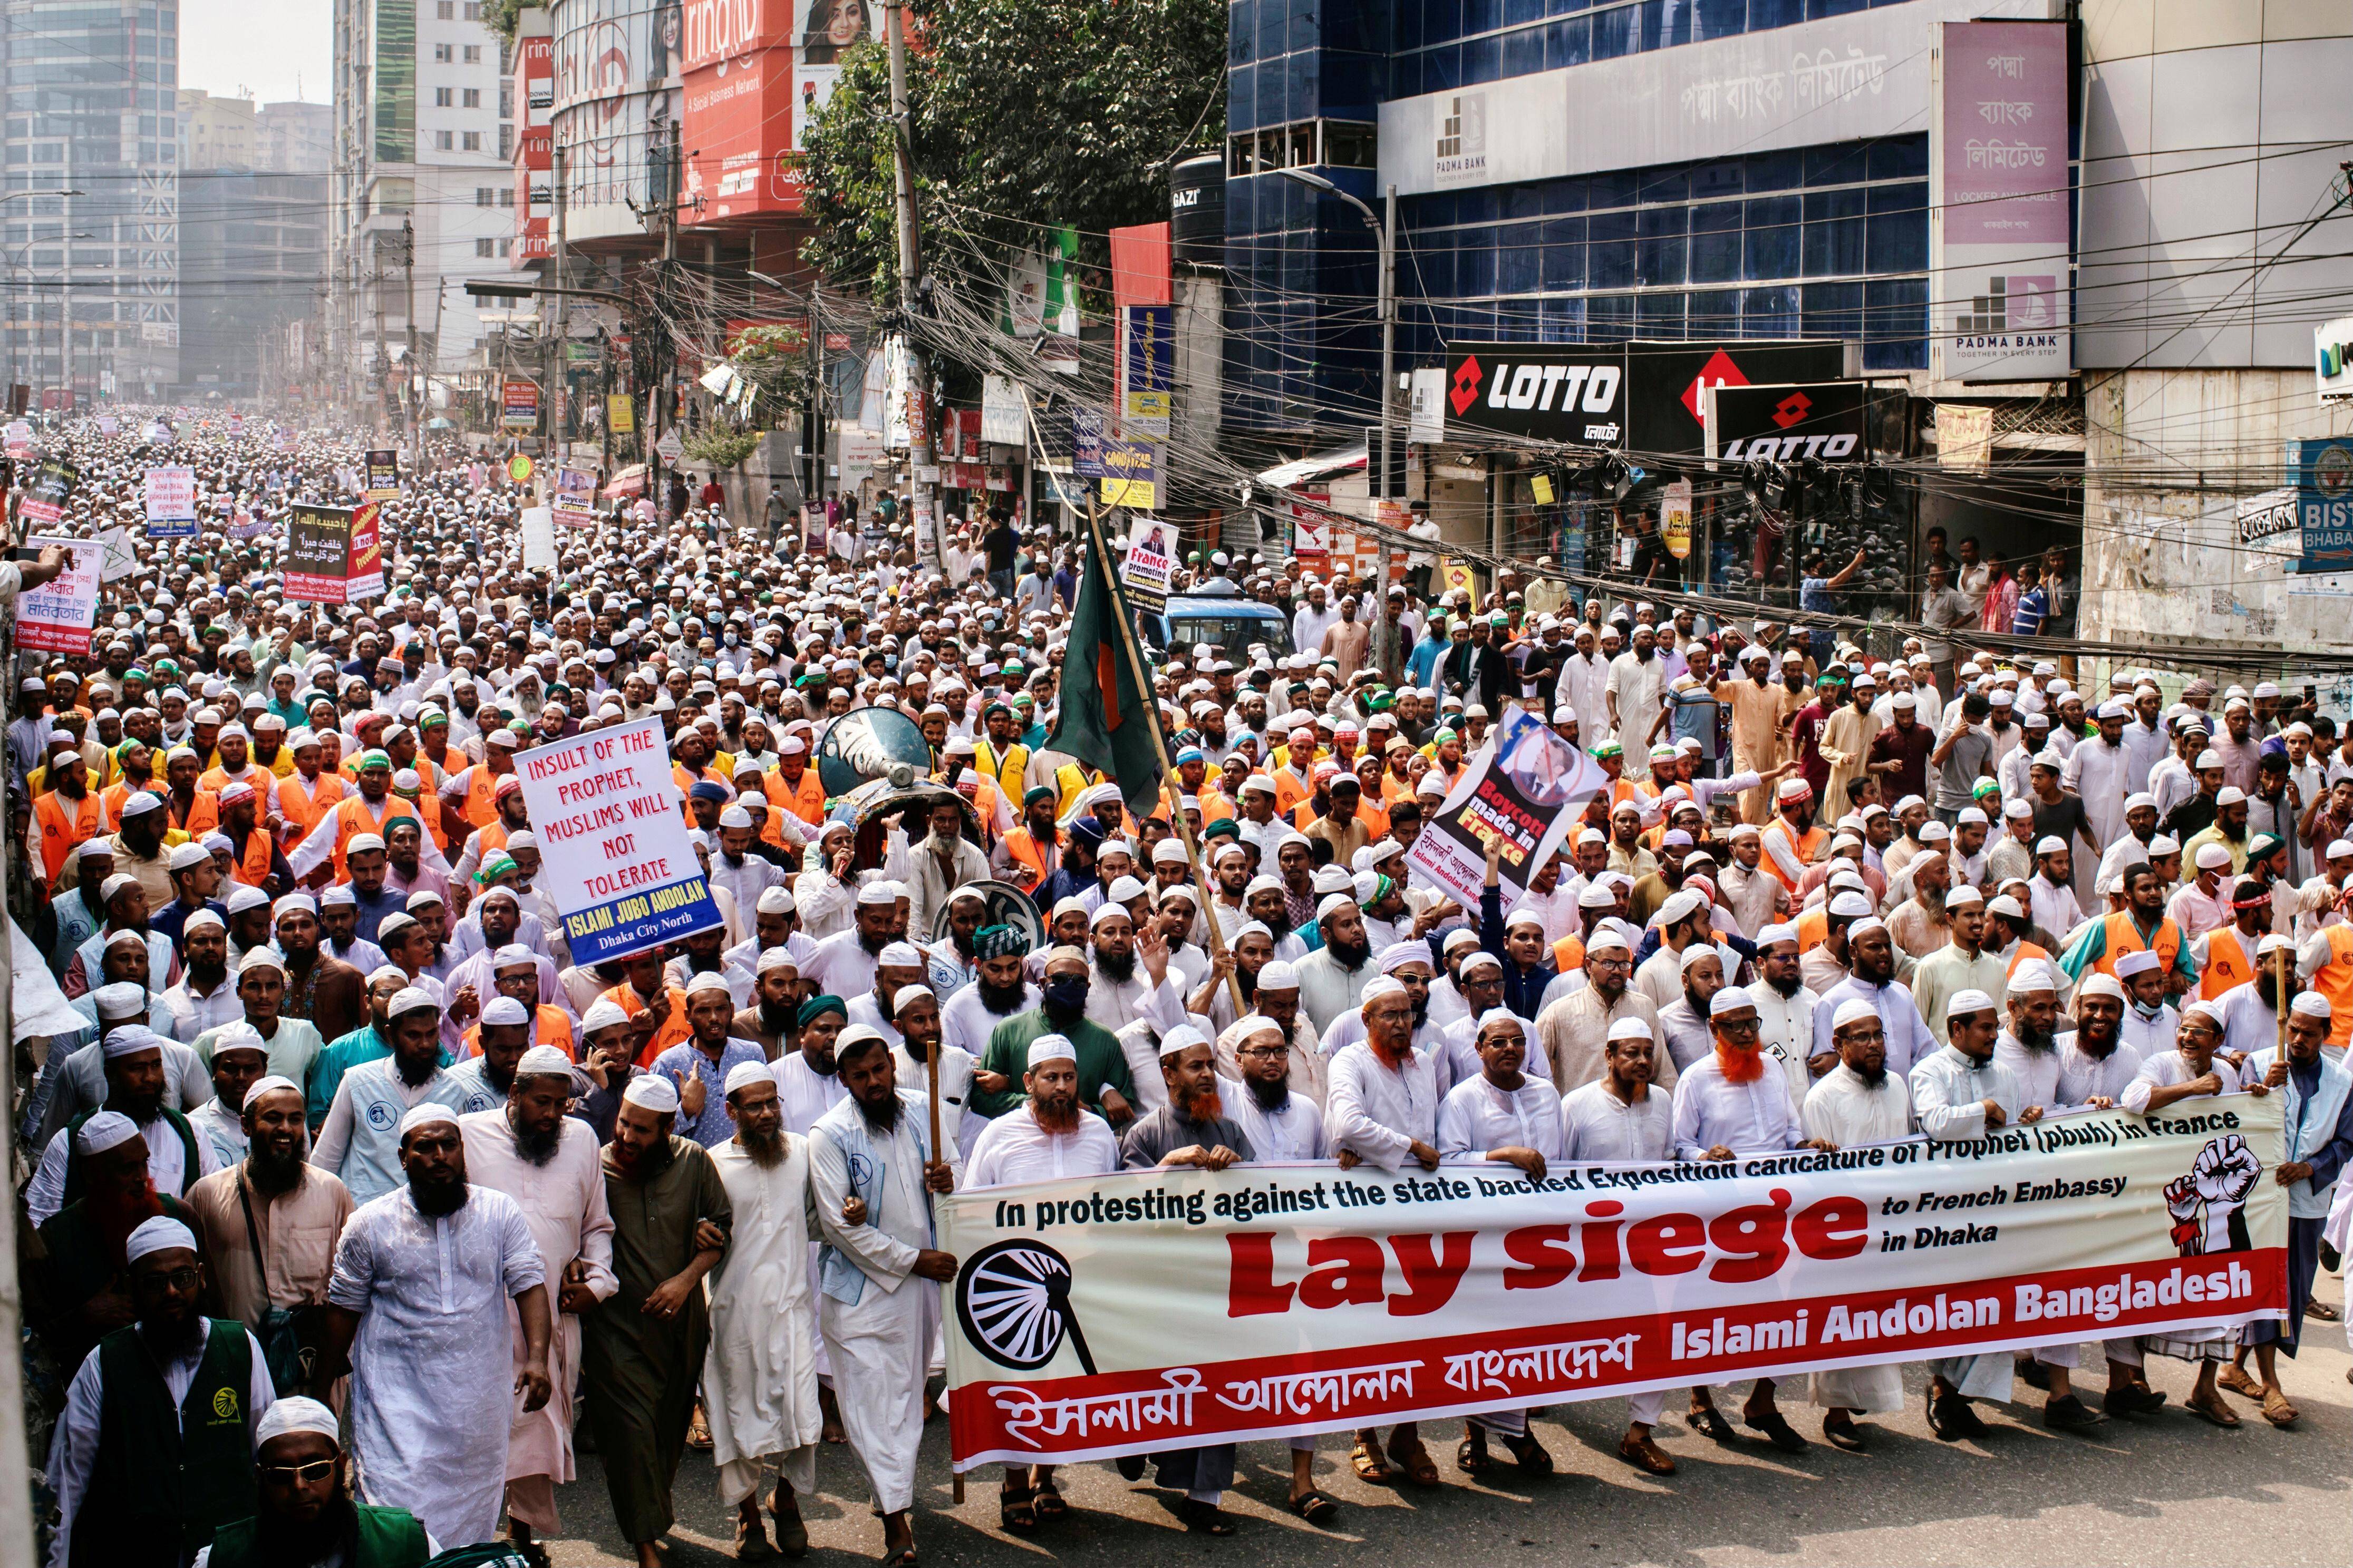 Supporters and activists of the Islami Andolan Bangladesh, an Islamic political party, take part in a protest calling for the boycott of French products and to denounce the French President Emmanuel Macron for his comments over a cartoon of Prophet Muhammad, in Dhaka, Bangladesh, October 27, 2020. (STRINGER)